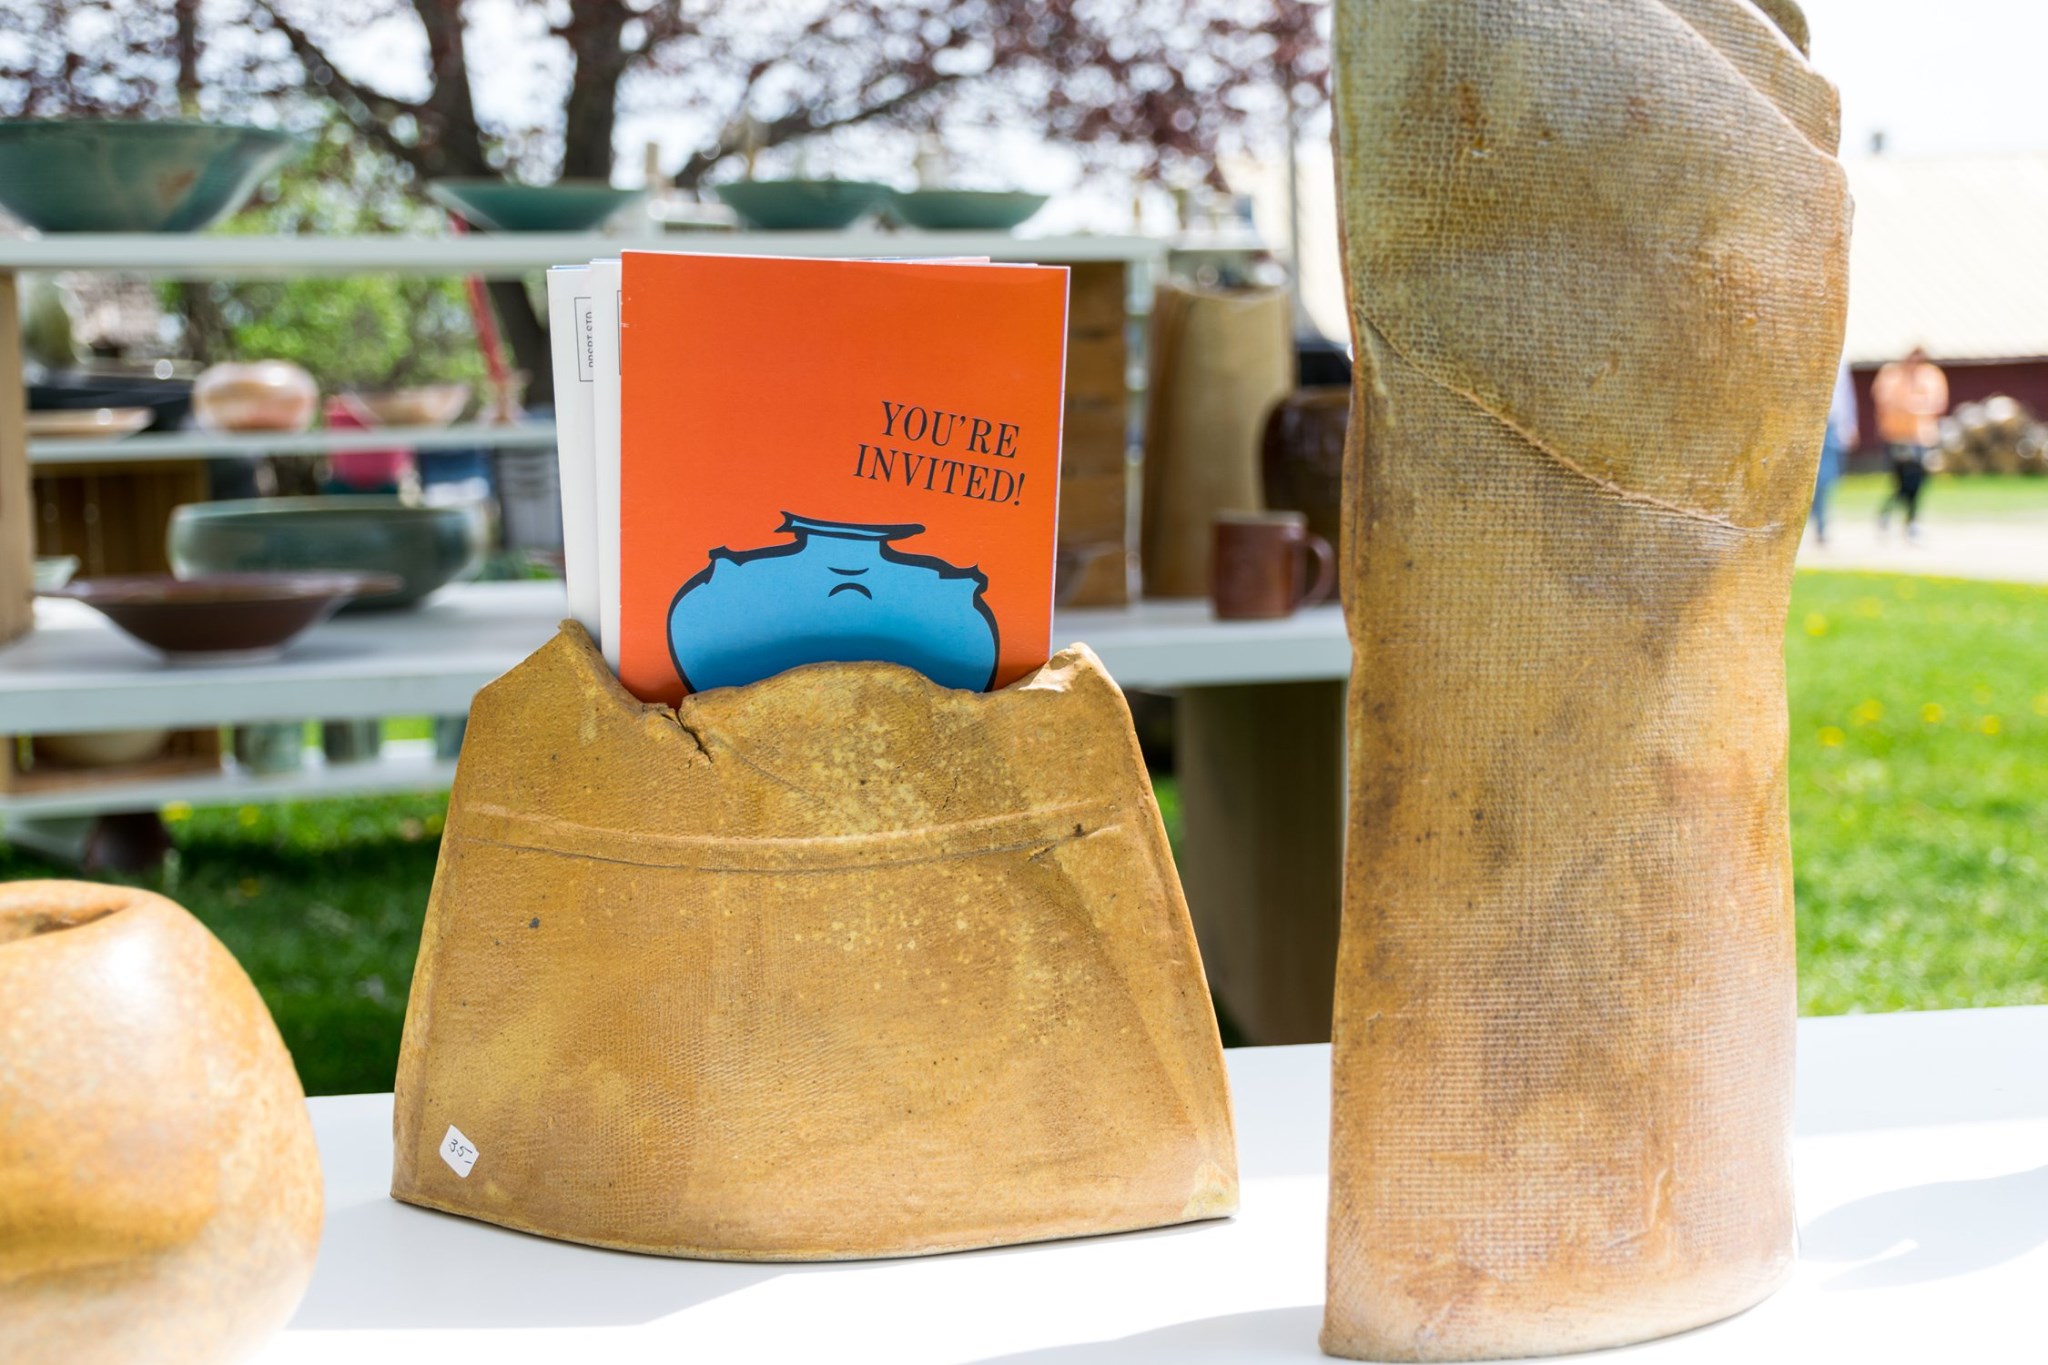 Clay Collective brochure sticking out of pottery on table outdoors